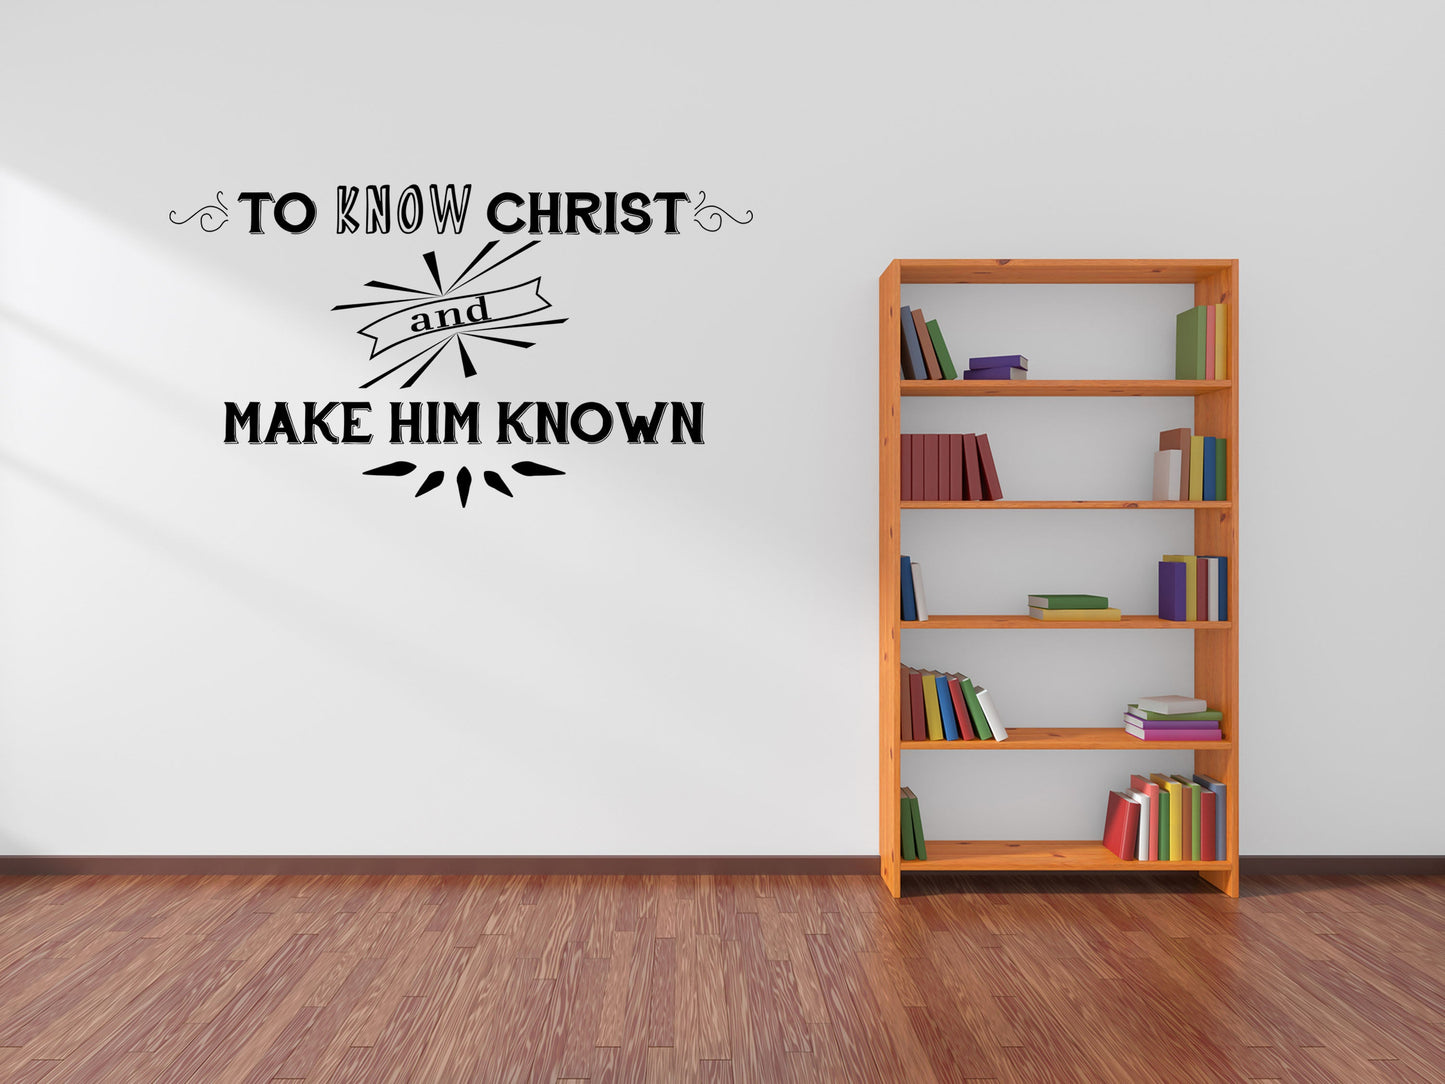 To Make Christ Known Bible Wall Decal - Inspirational Wall Signs Vinyl Wall Decal Inspirational Wall Signs 